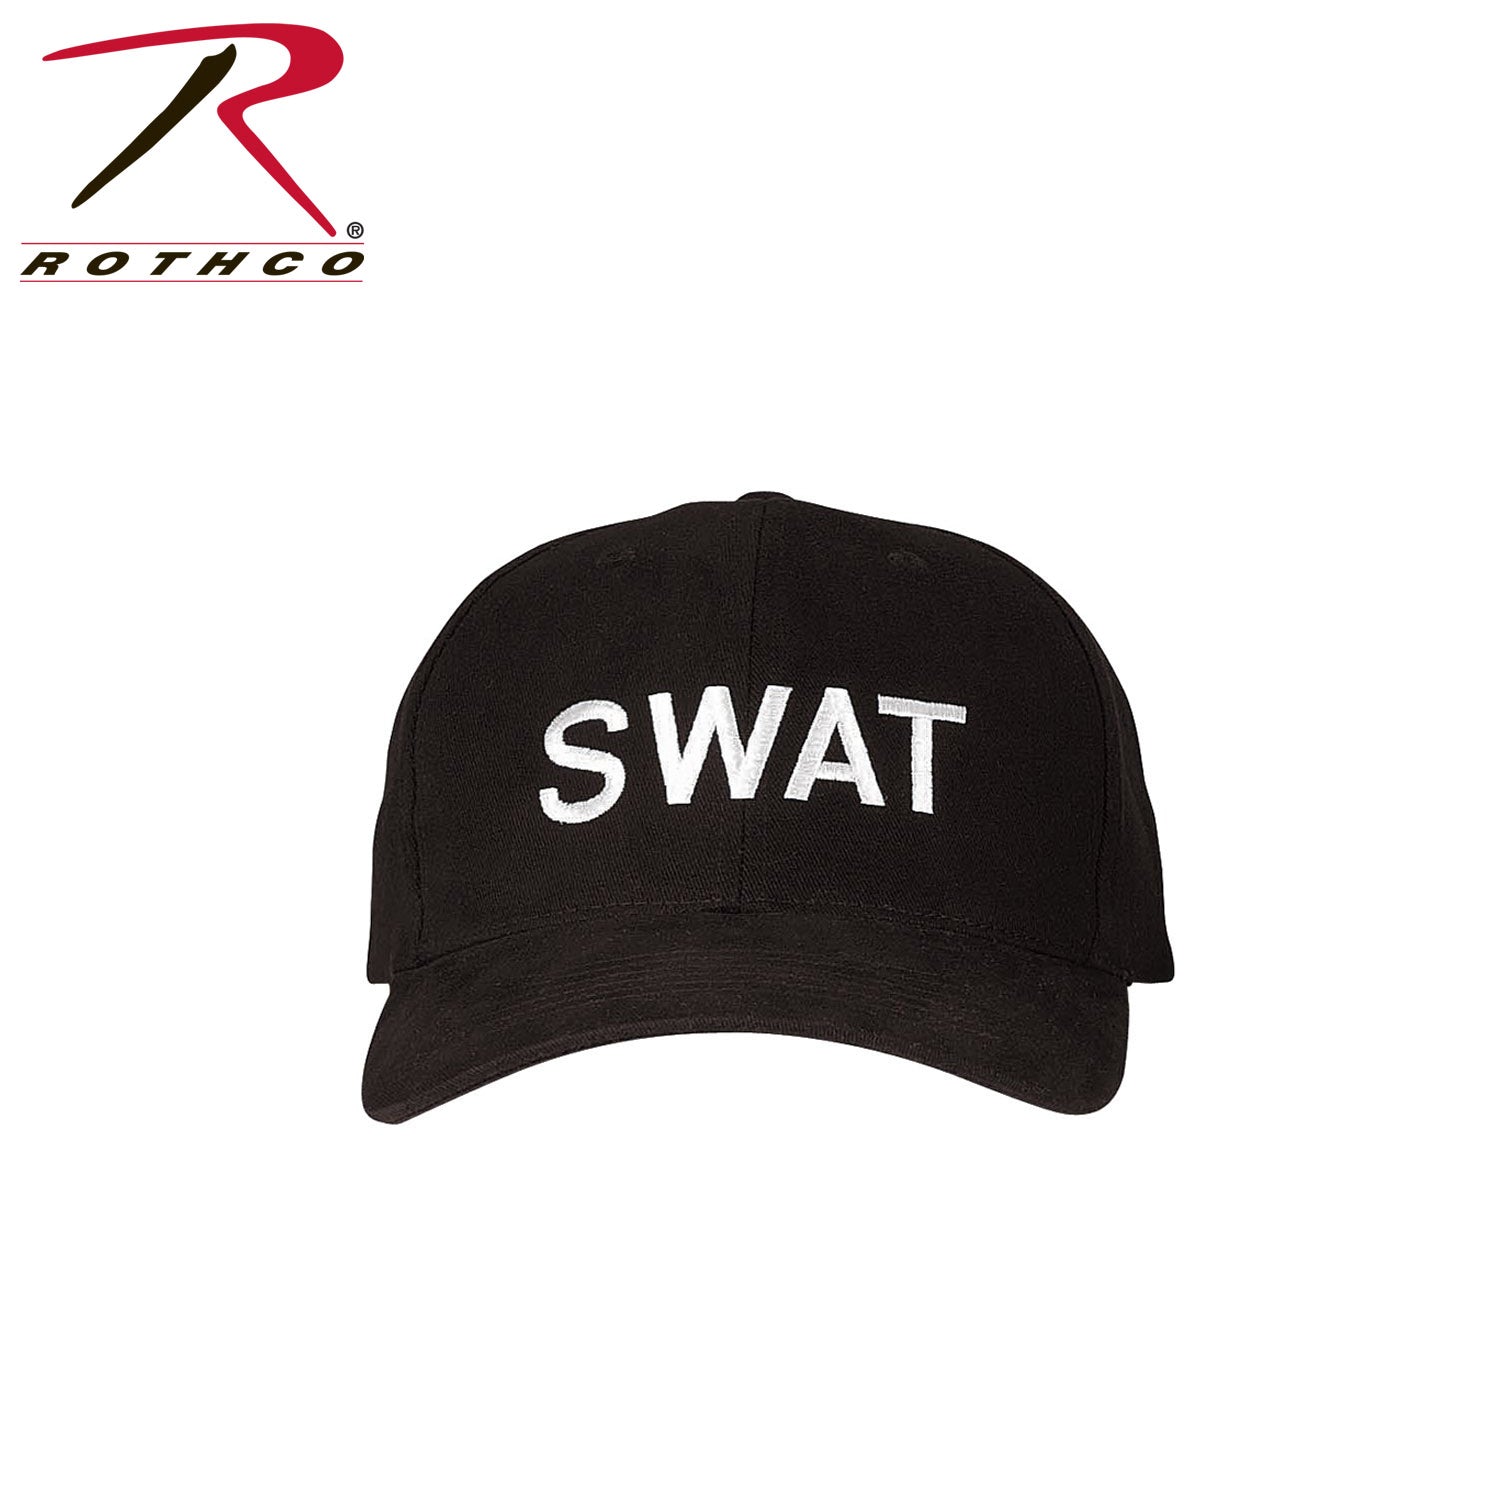 Rothco SWAT Law Enforcement Adjustable Insignia Cap